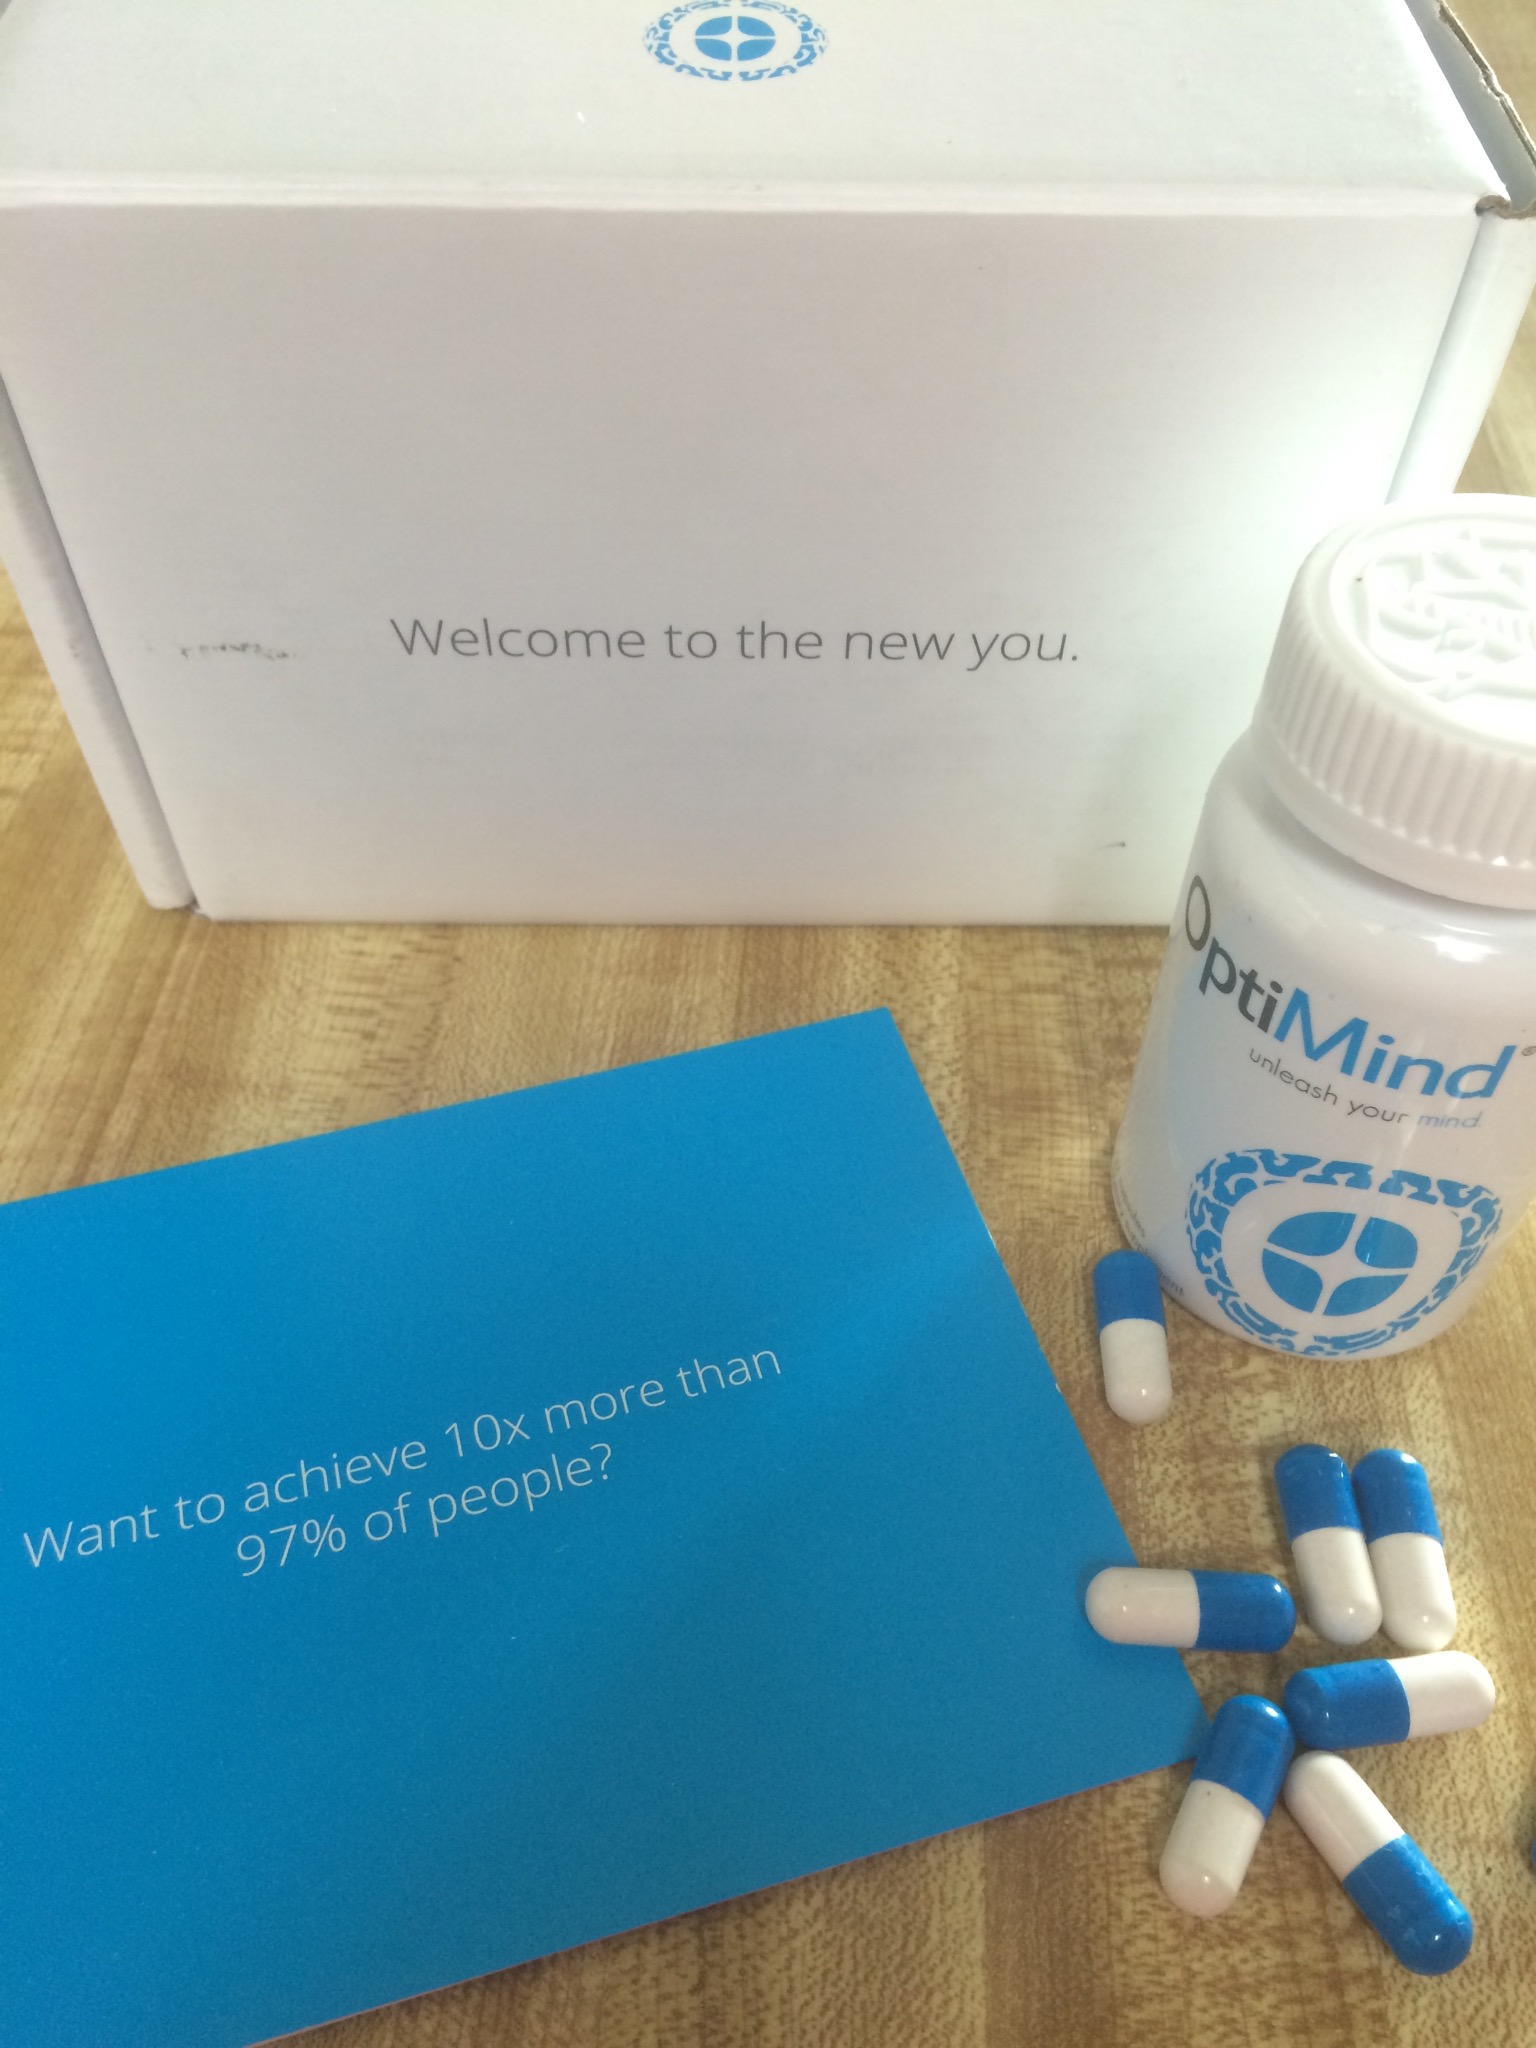 2014 Holiday Gift Guide: Give The Gift of Clarity with OptiMind + Giveaway